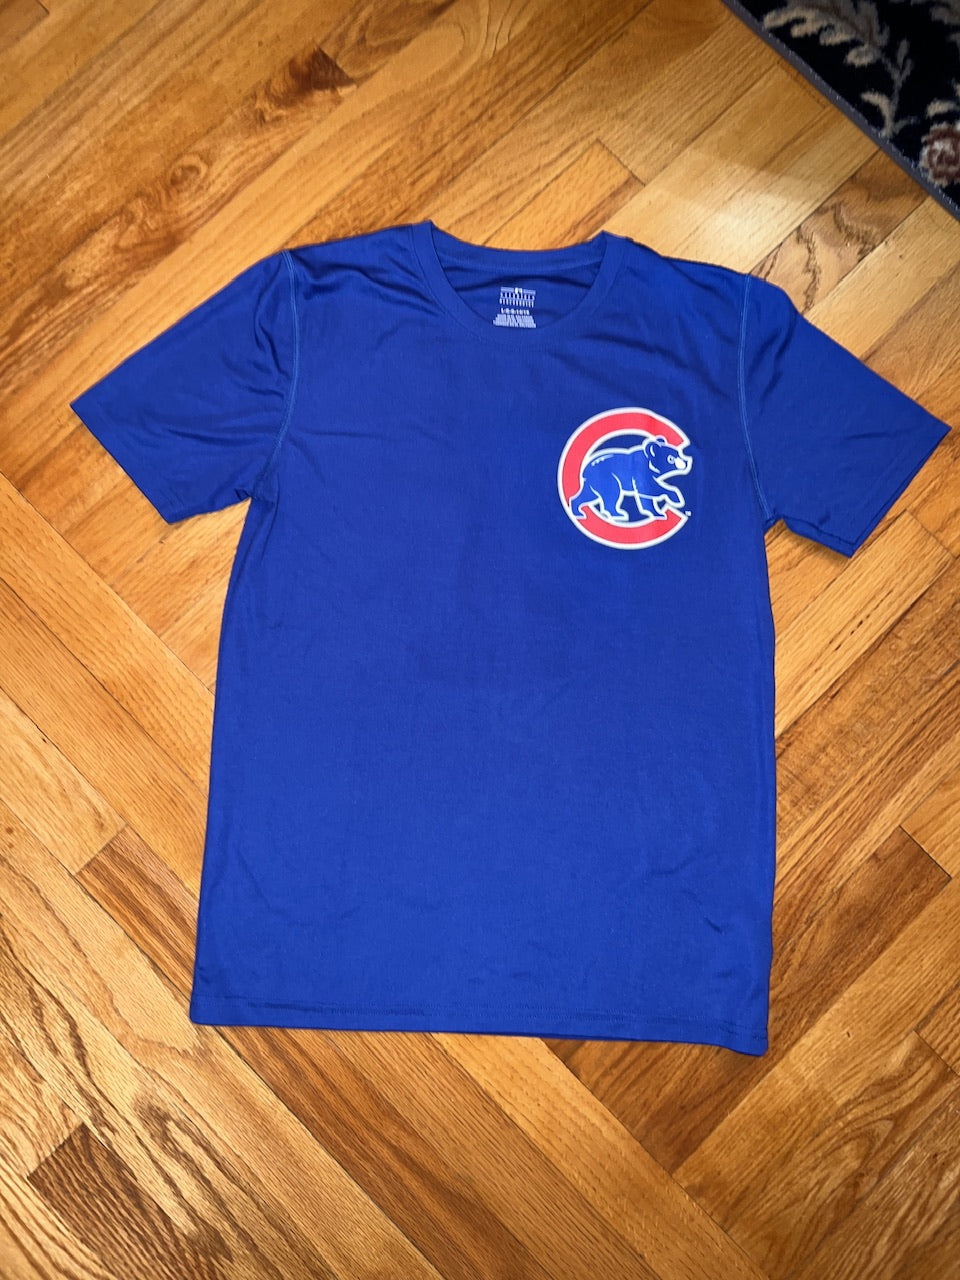 Chicago CUBS Rizzo 44 Genuine MerchandiseBlue Sport tee size boys large Large